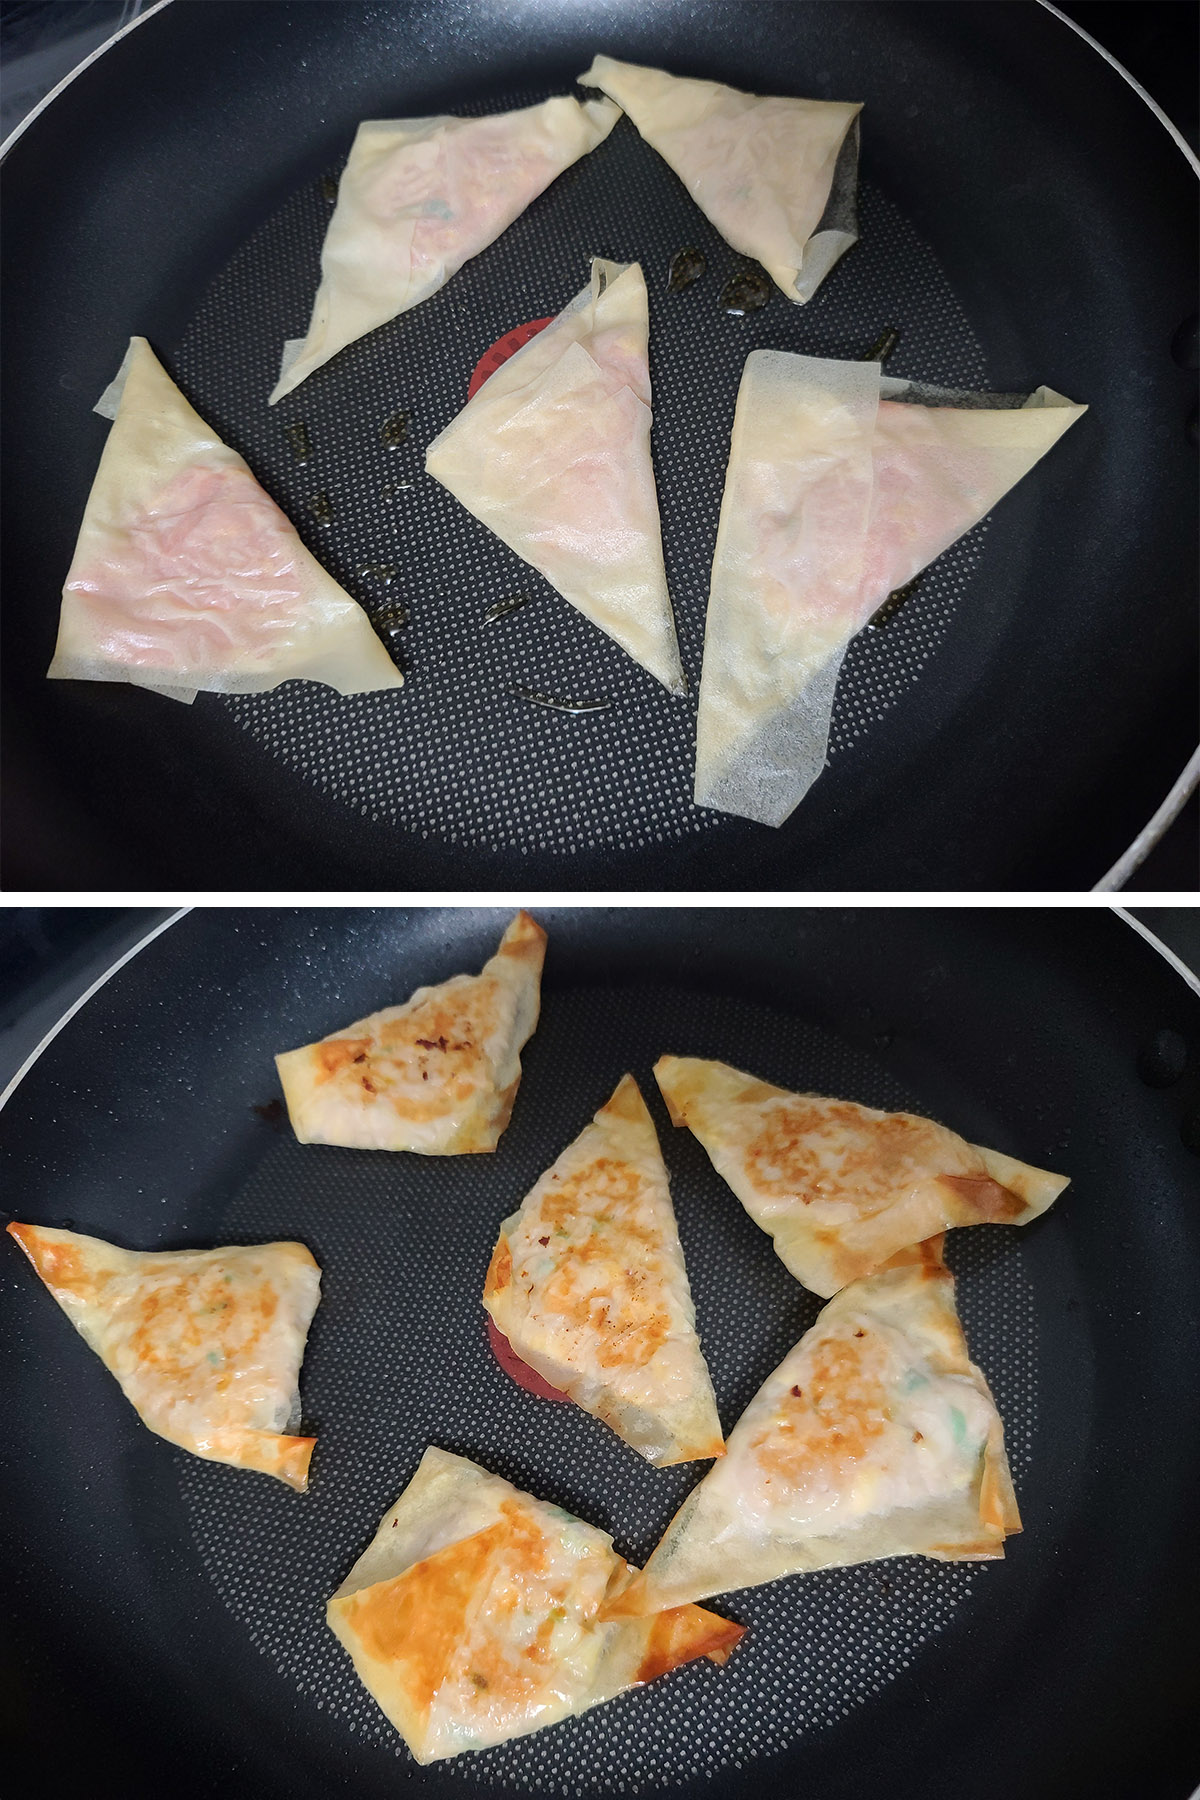 A two part image showing low carb gyoza being cooked in a nonstick pan.